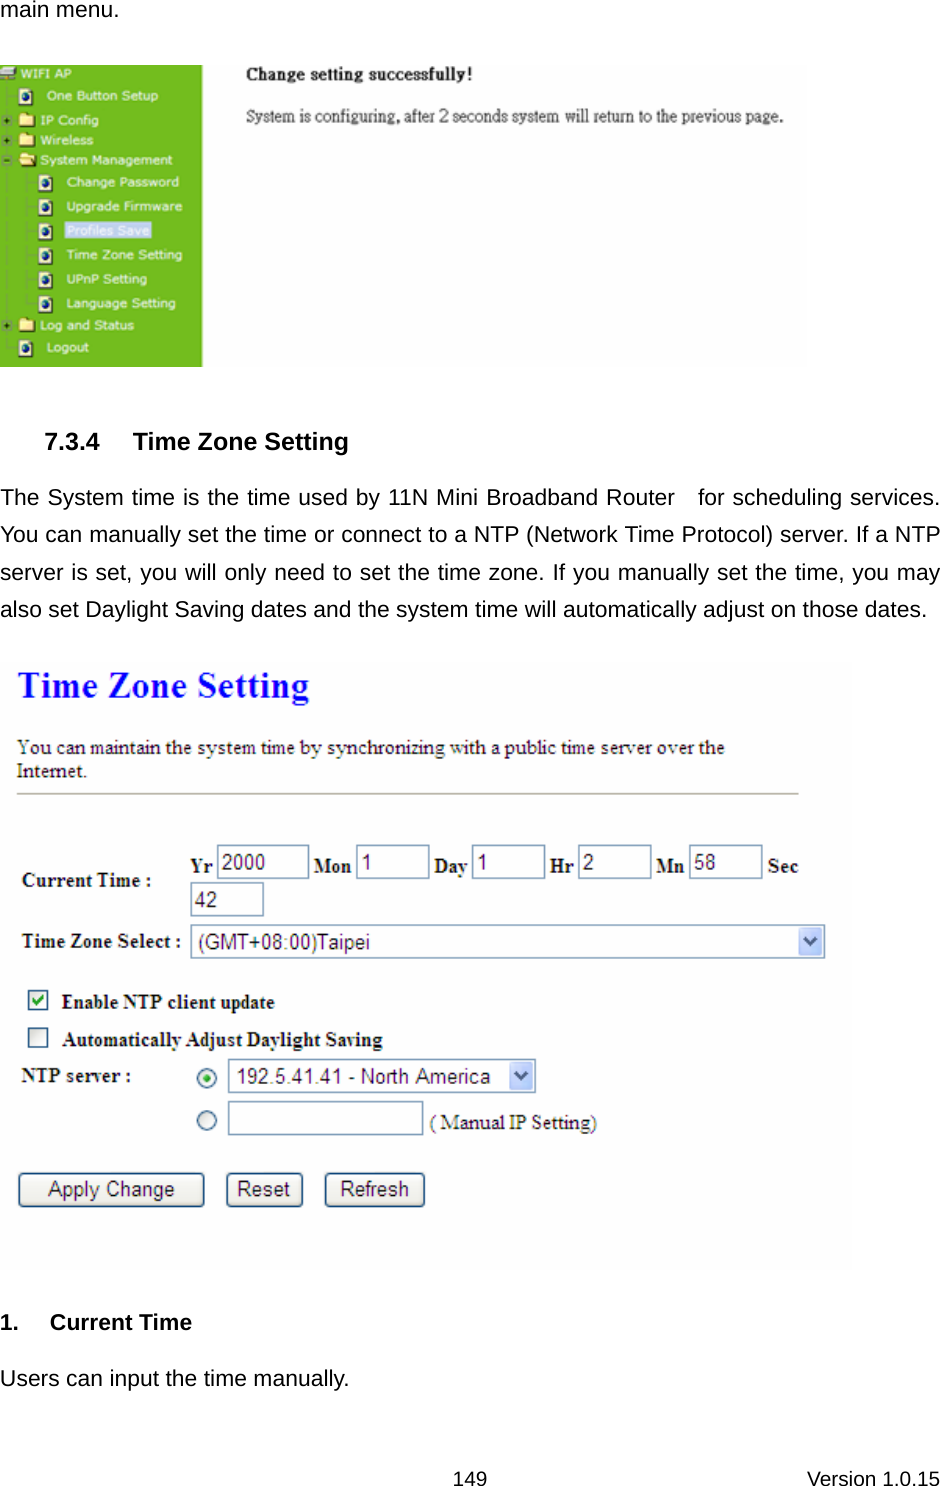 Version 1.0.15 149main menu.    7.3.4  Time Zone Setting The System time is the time used by 11N Mini Broadband Router    for scheduling services. You can manually set the time or connect to a NTP (Network Time Protocol) server. If a NTP server is set, you will only need to set the time zone. If you manually set the time, you may also set Daylight Saving dates and the system time will automatically adjust on those dates.  1. Current Time Users can input the time manually. 